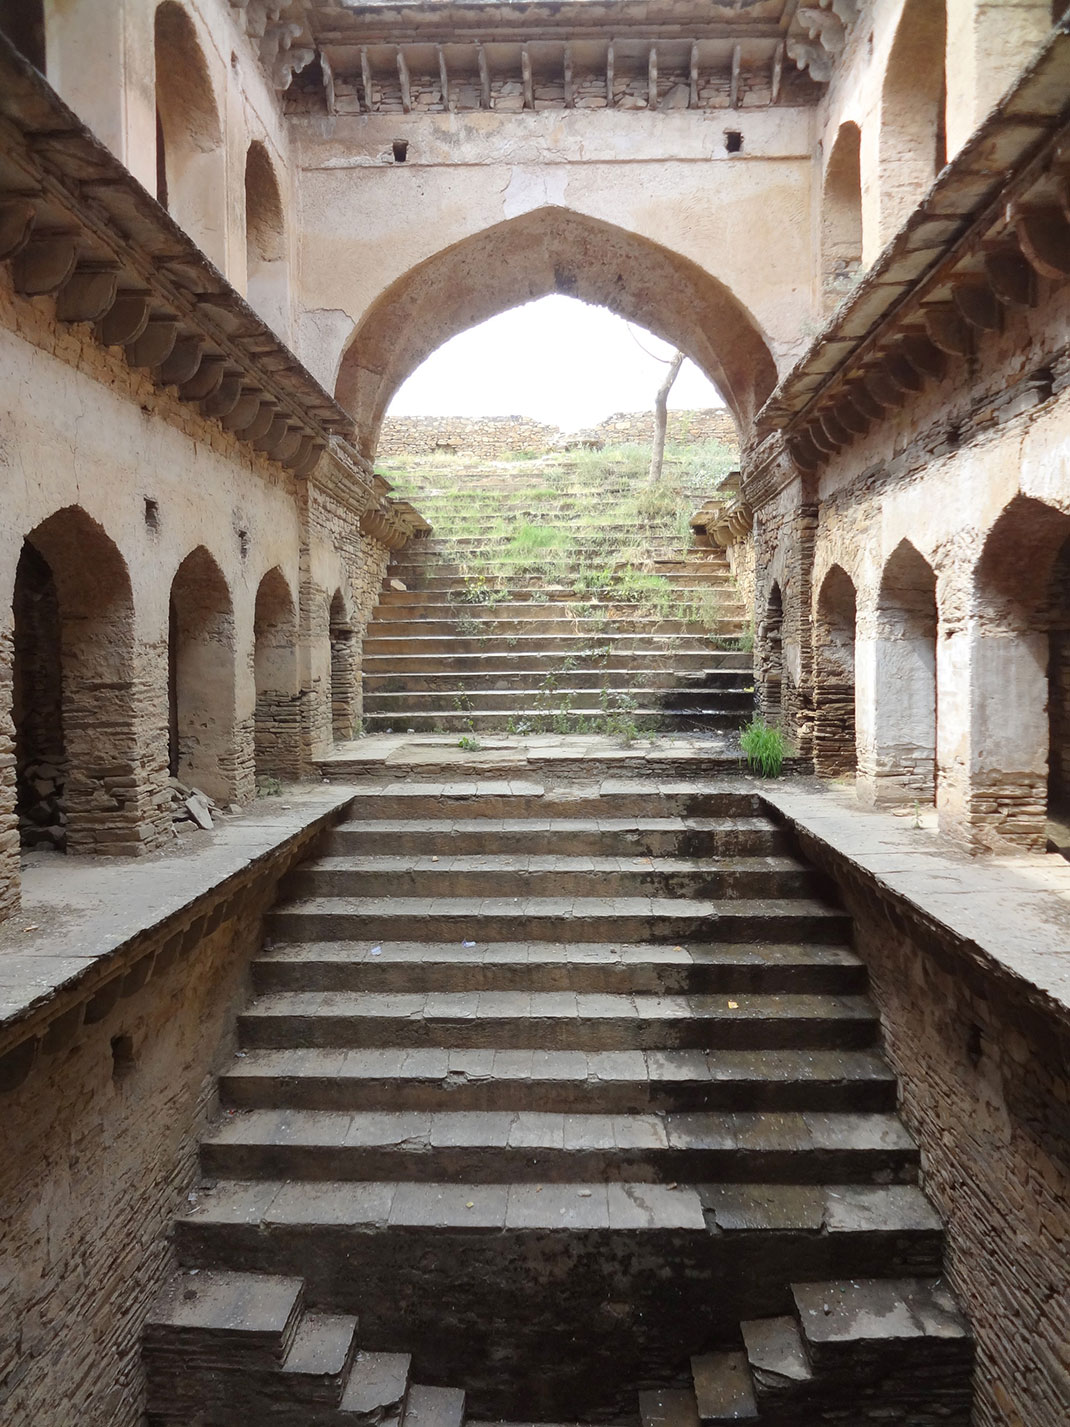 Admire These 2000 Year Old Somptous Buildings In India Destined To Disappear-20